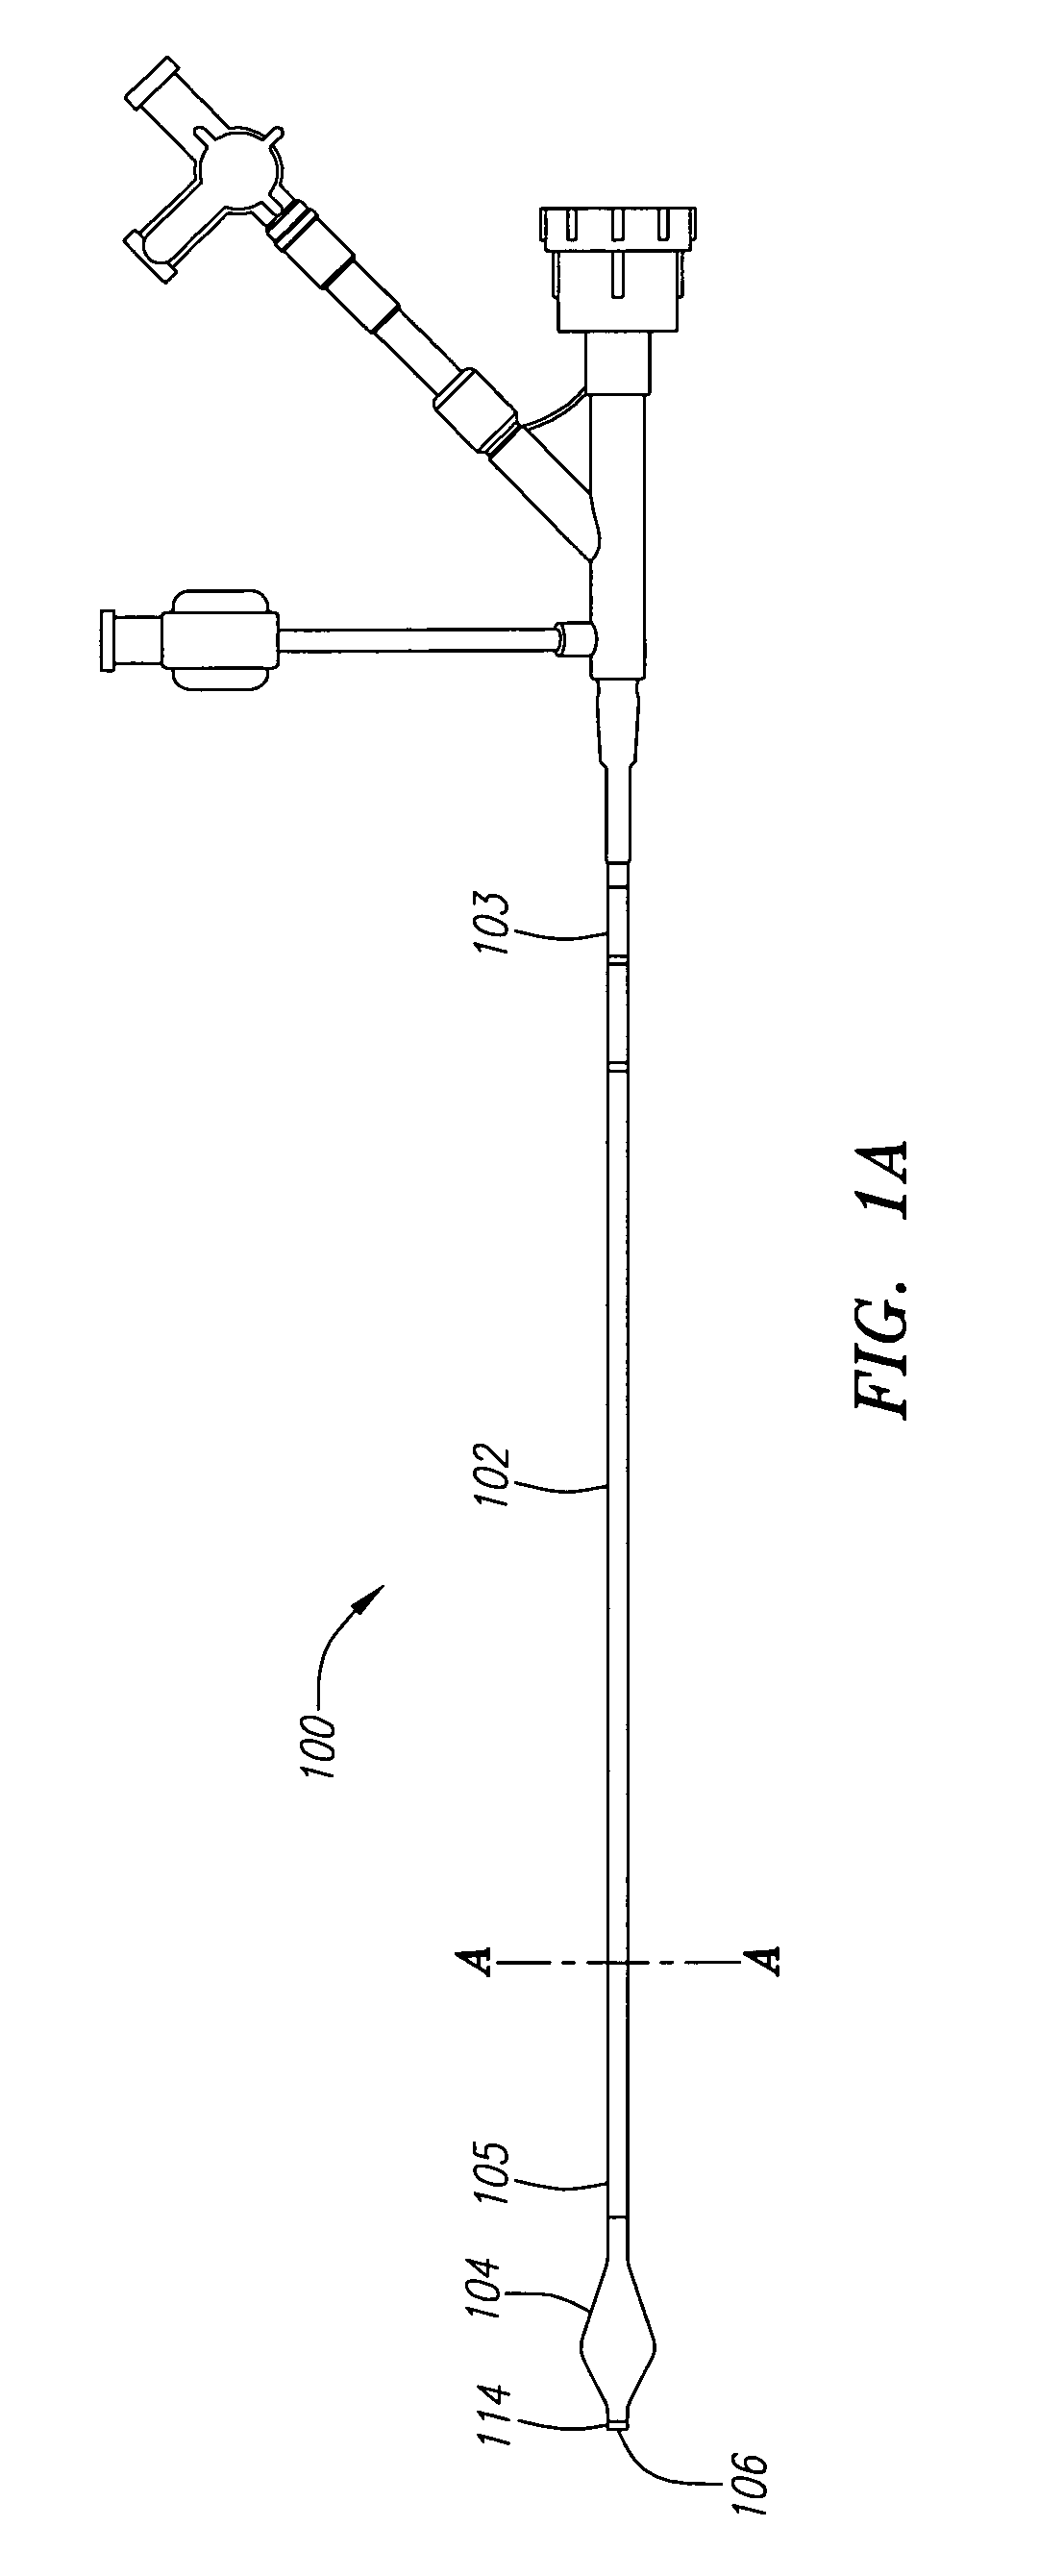 Embolic protection device and methods of use